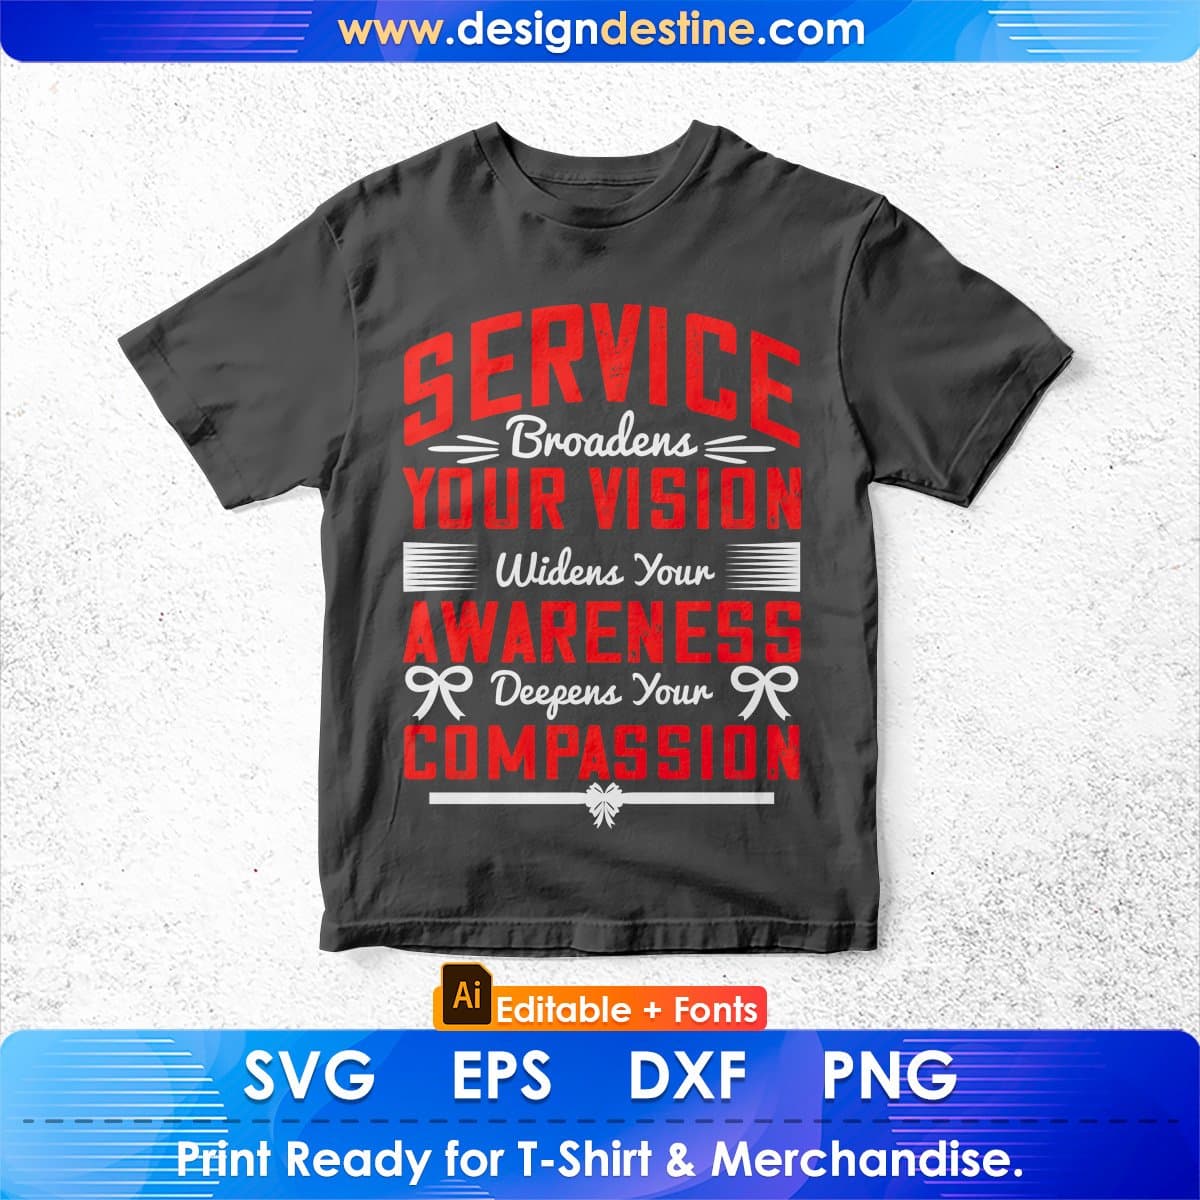 Service Broadens Your Vision Widens Your Awareness Editable T shirt Design In Ai Svg Files